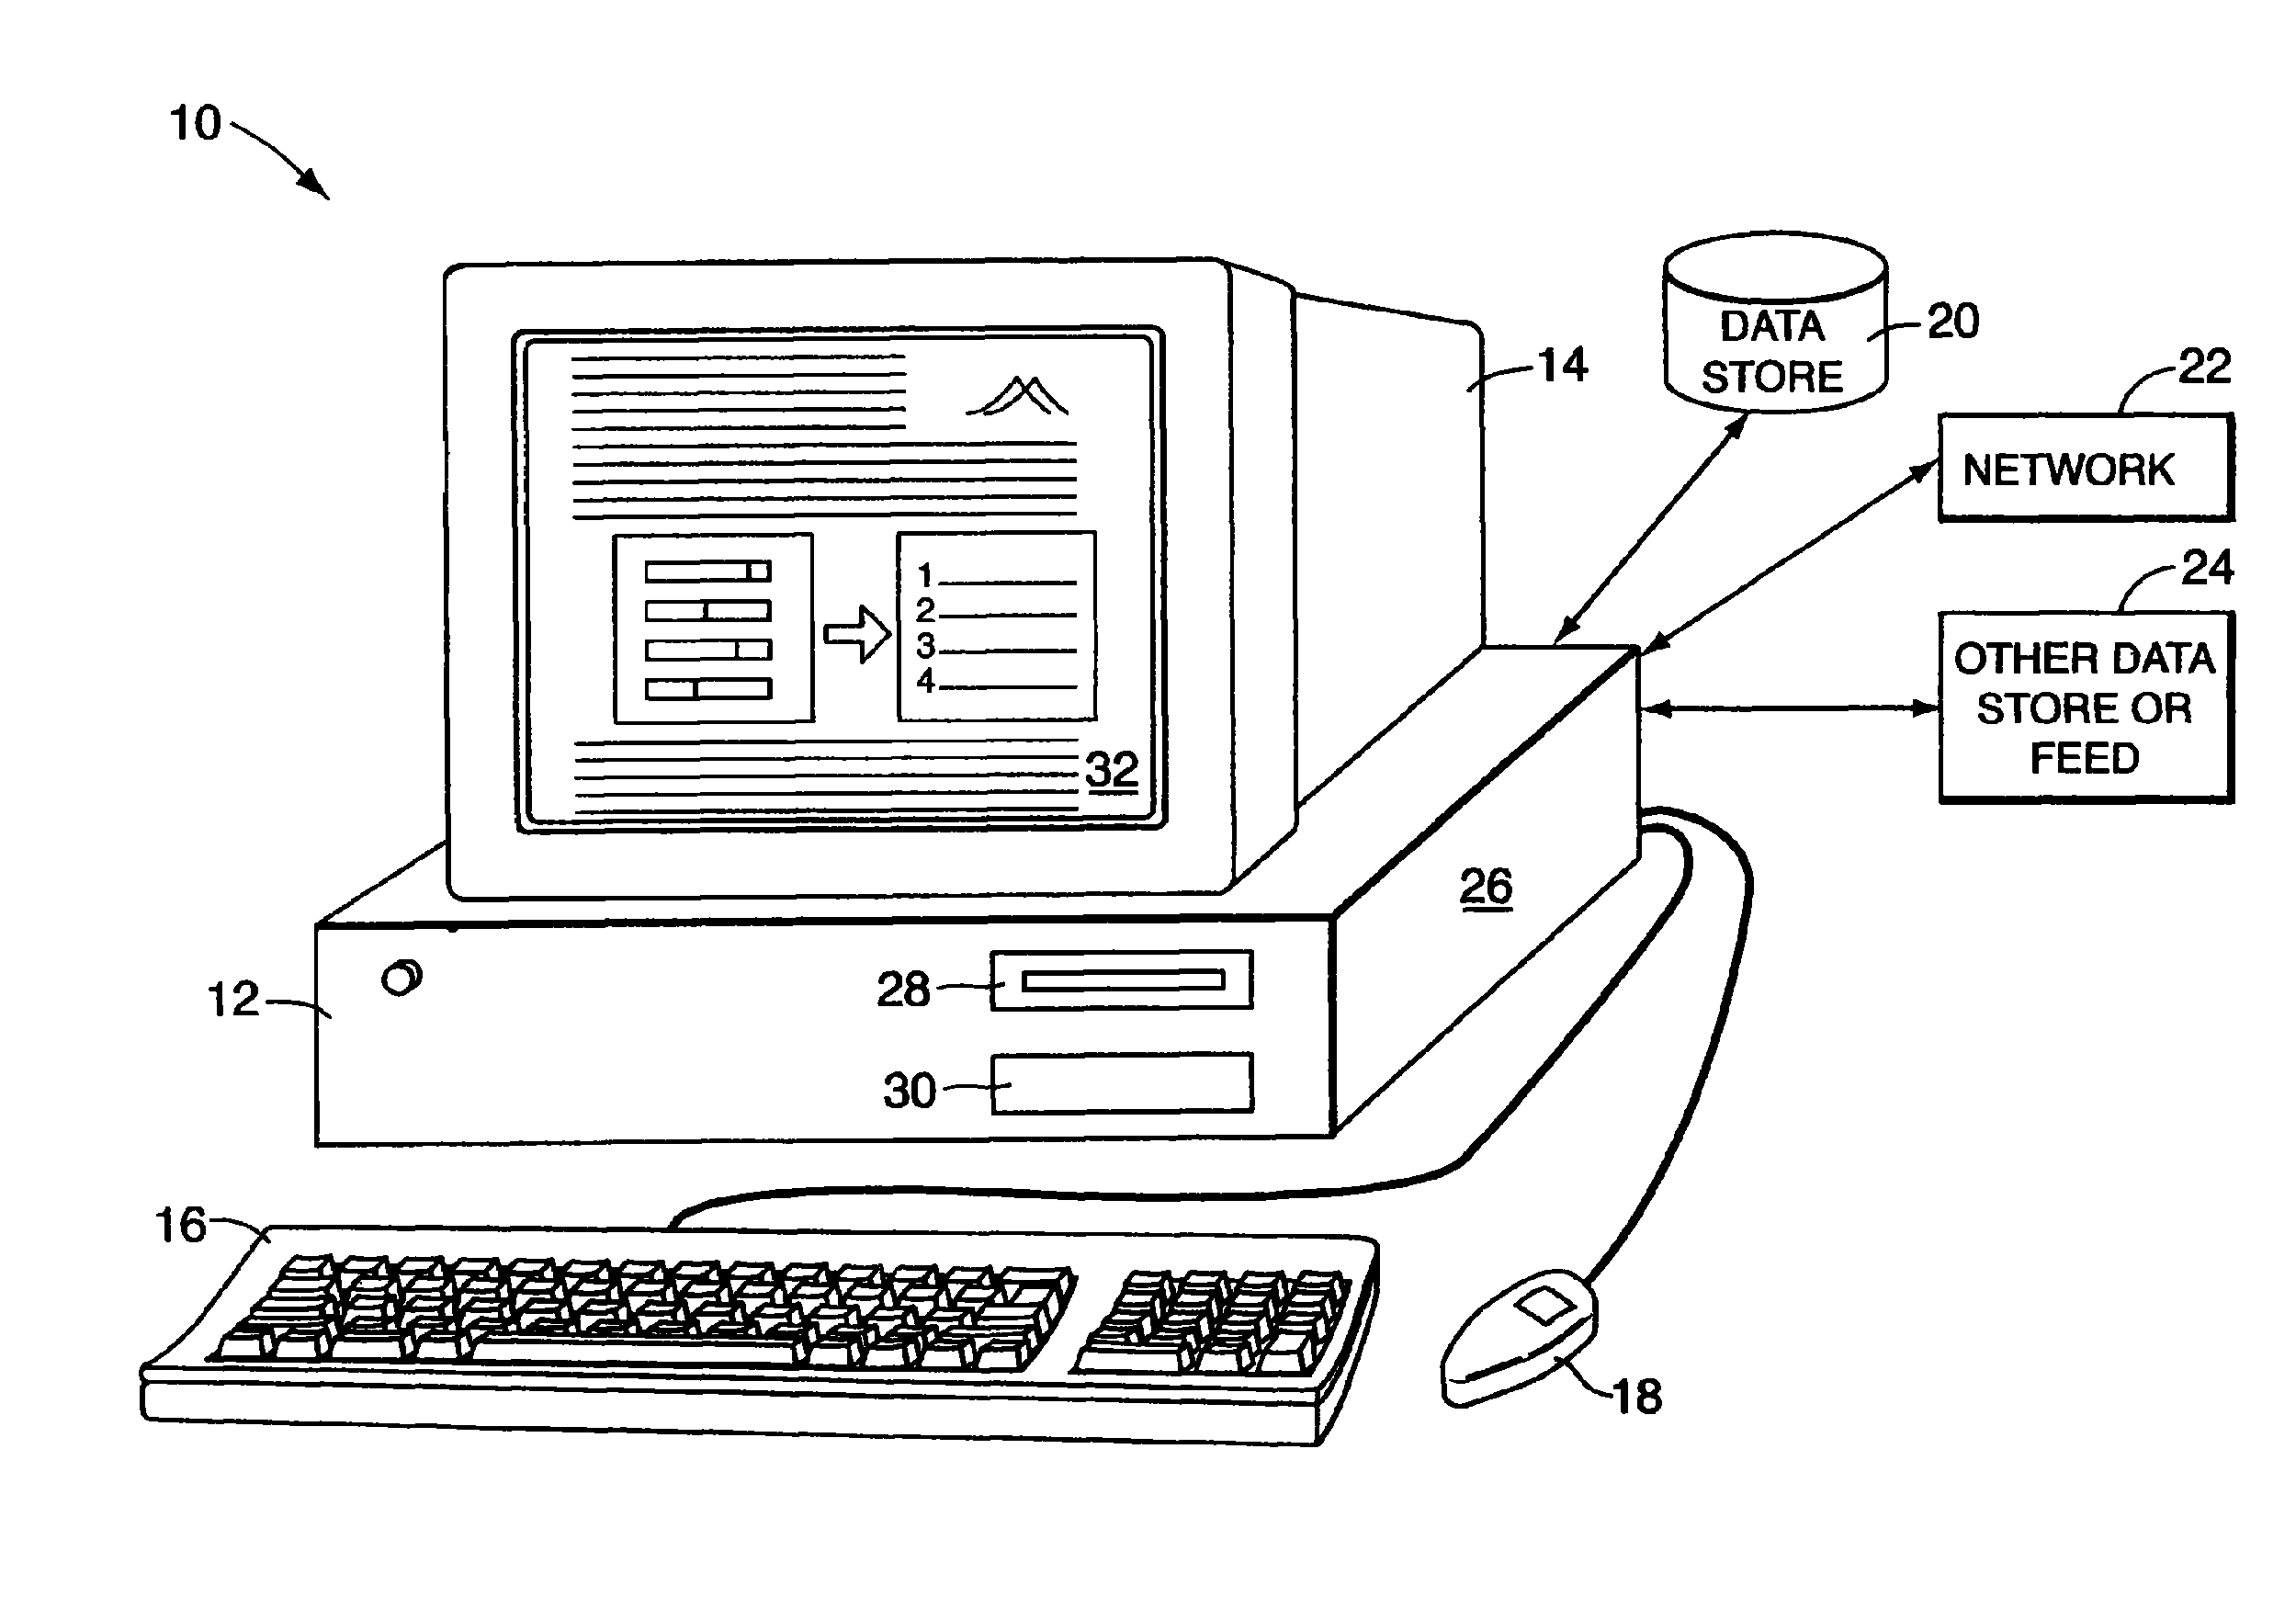 Weighted preference inference system and method